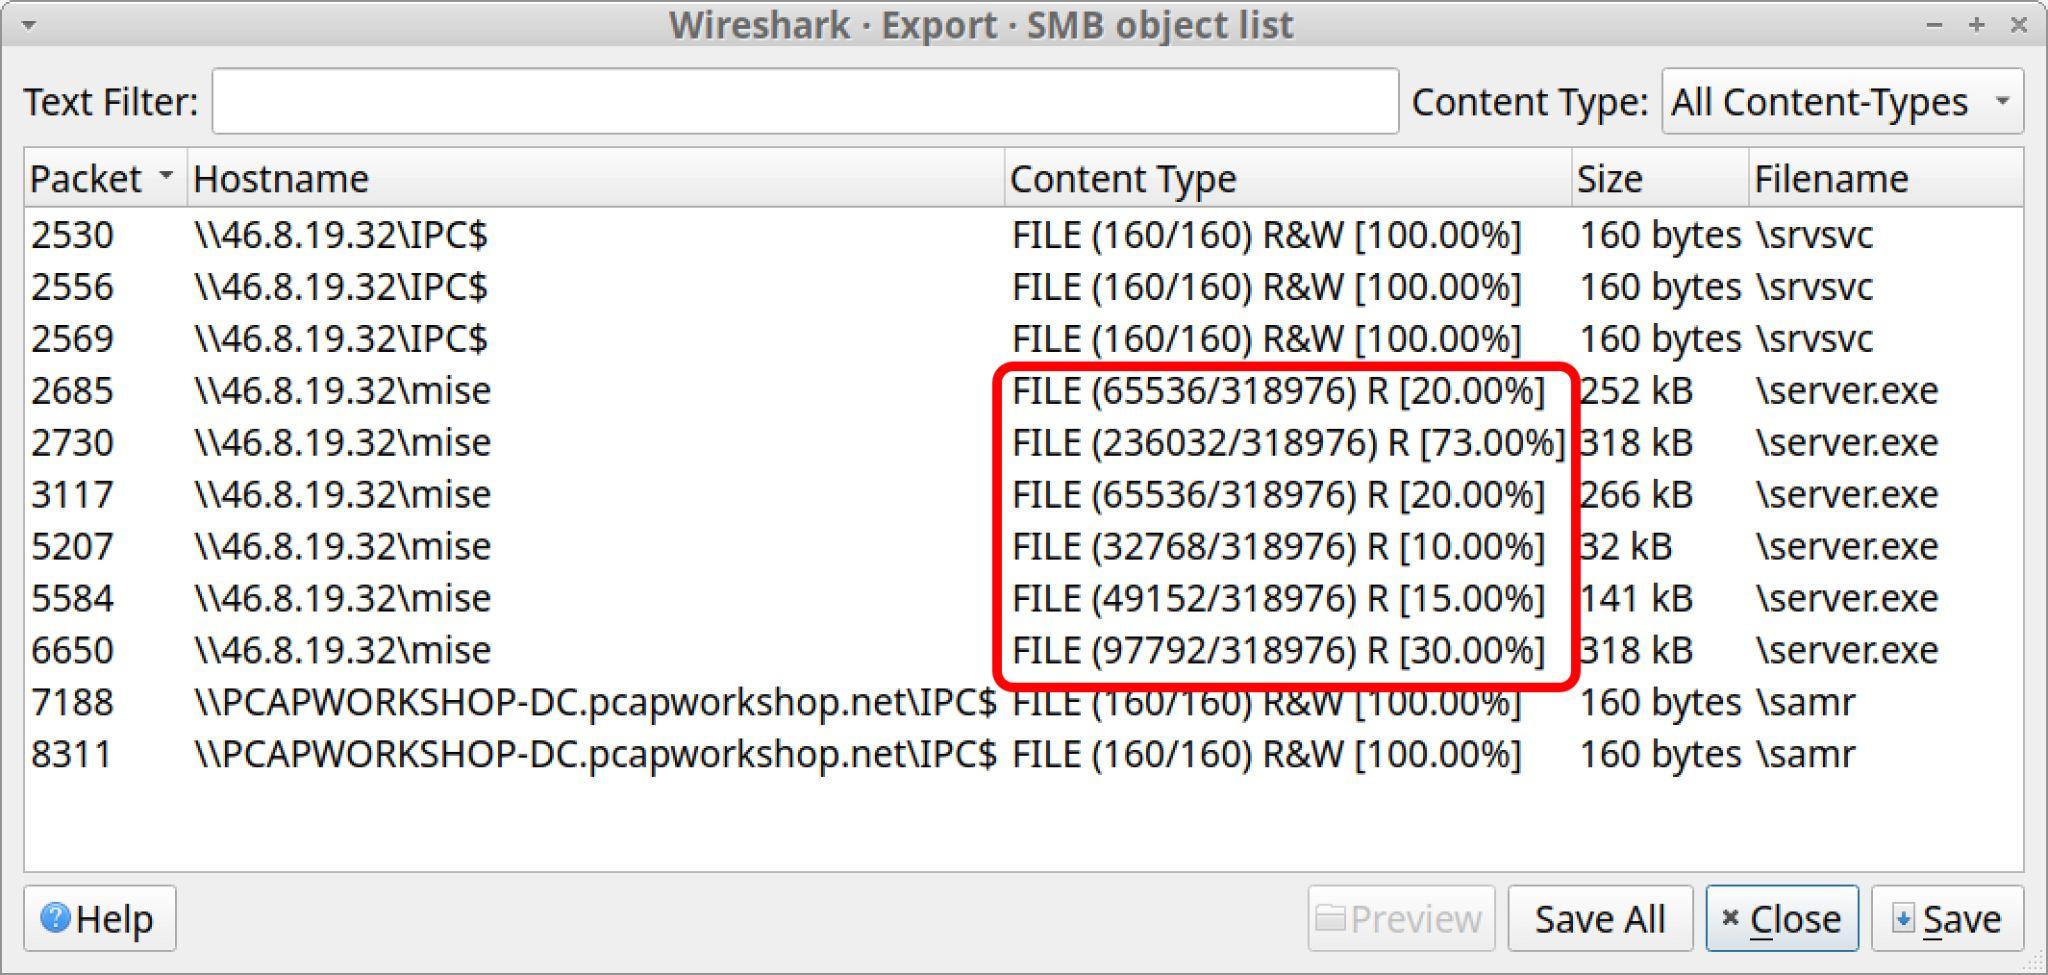 Image 11 is a screenshot of Wireshark showing the exported objects with the content type highlighted in red. 